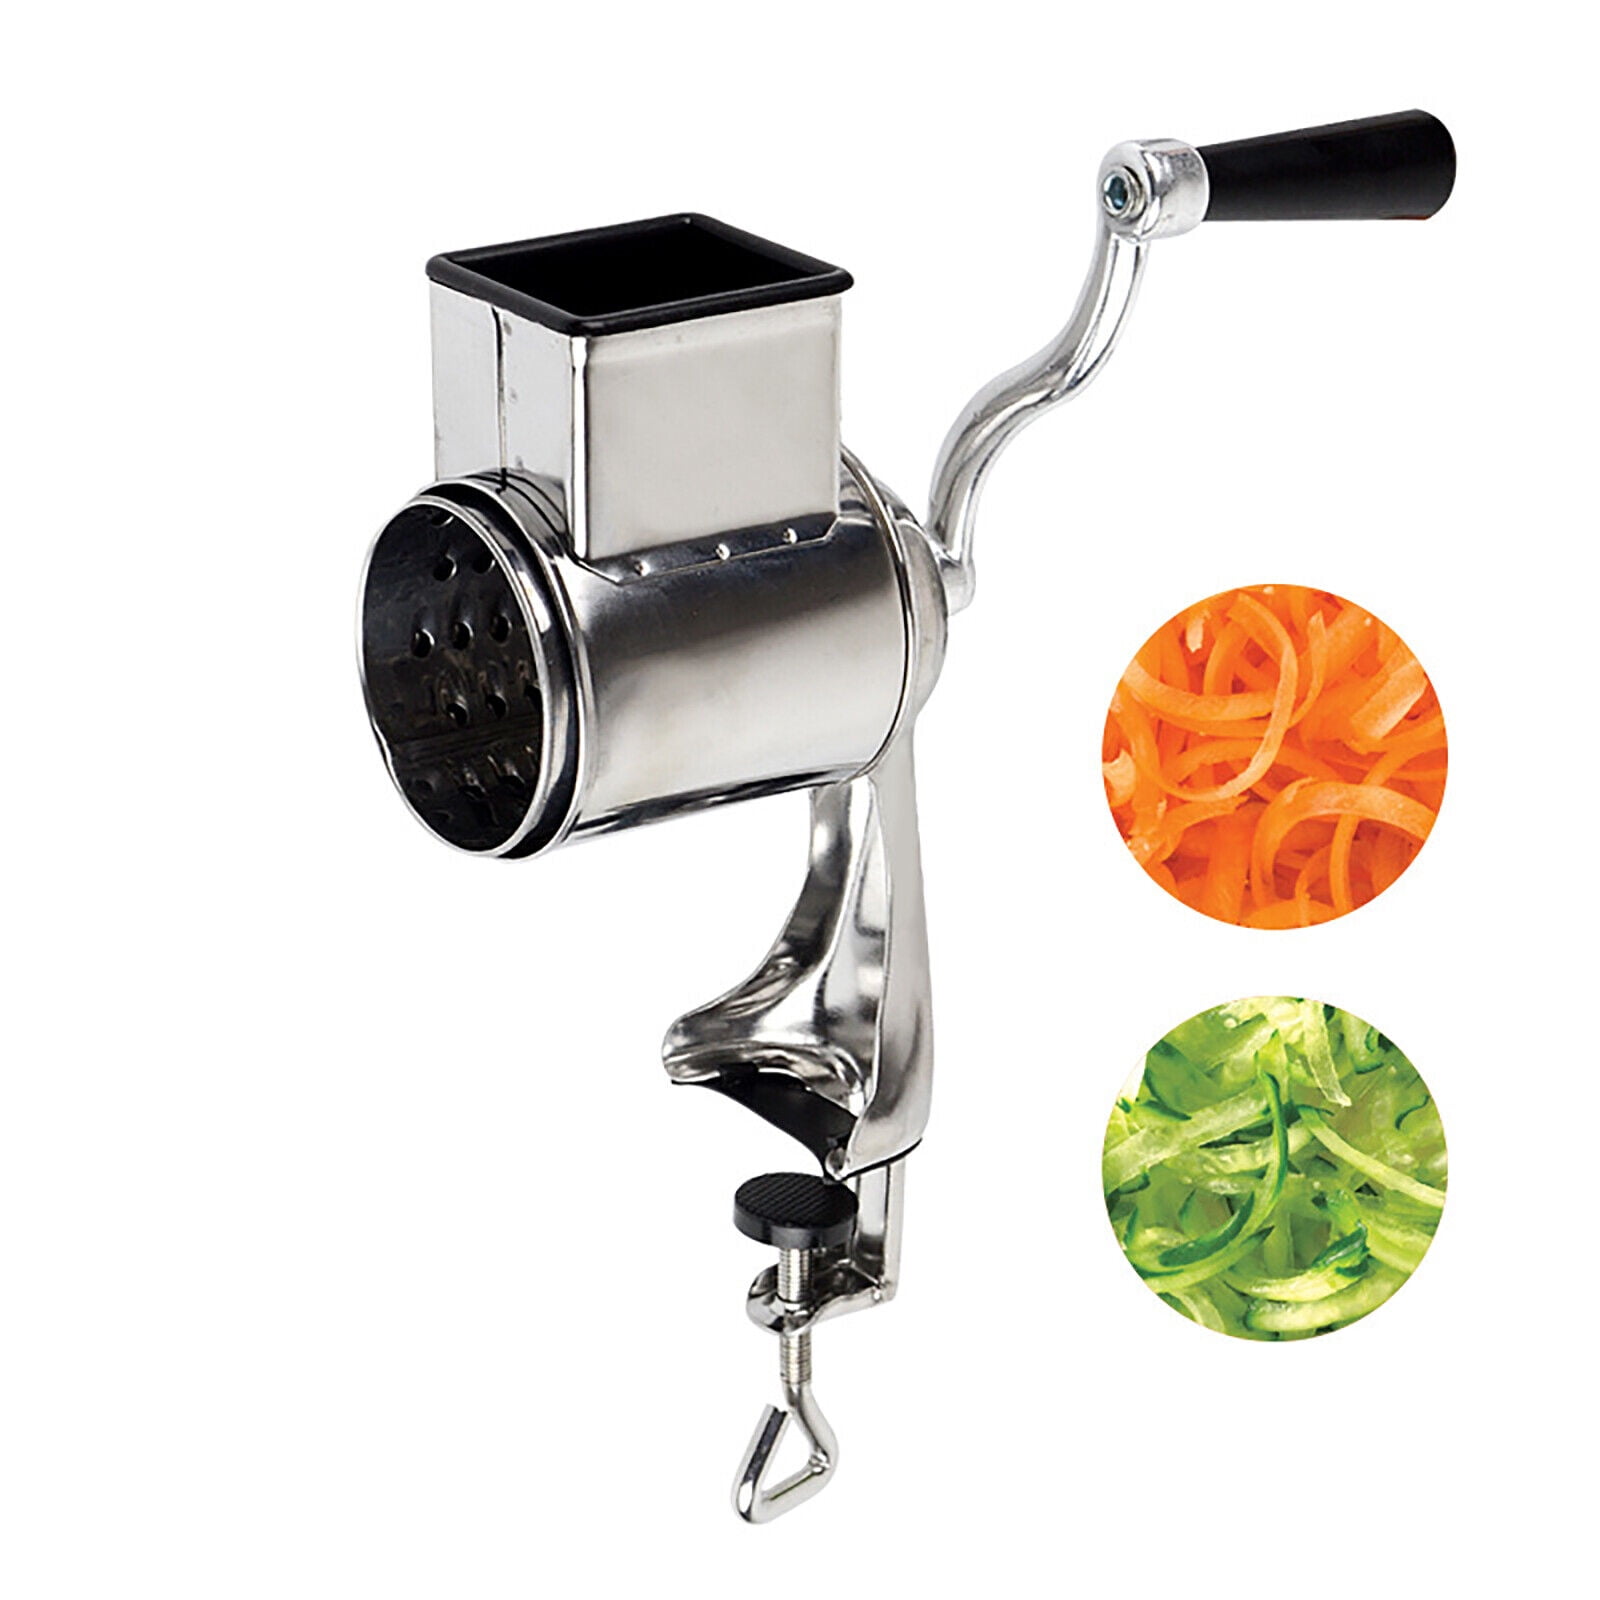 Miumaeov Stainless Steel Rotary Vegetable Cheese Grater Manual Rotary Grater  with 5 Cone Blades Attachment Multi-Functional Food Processor 